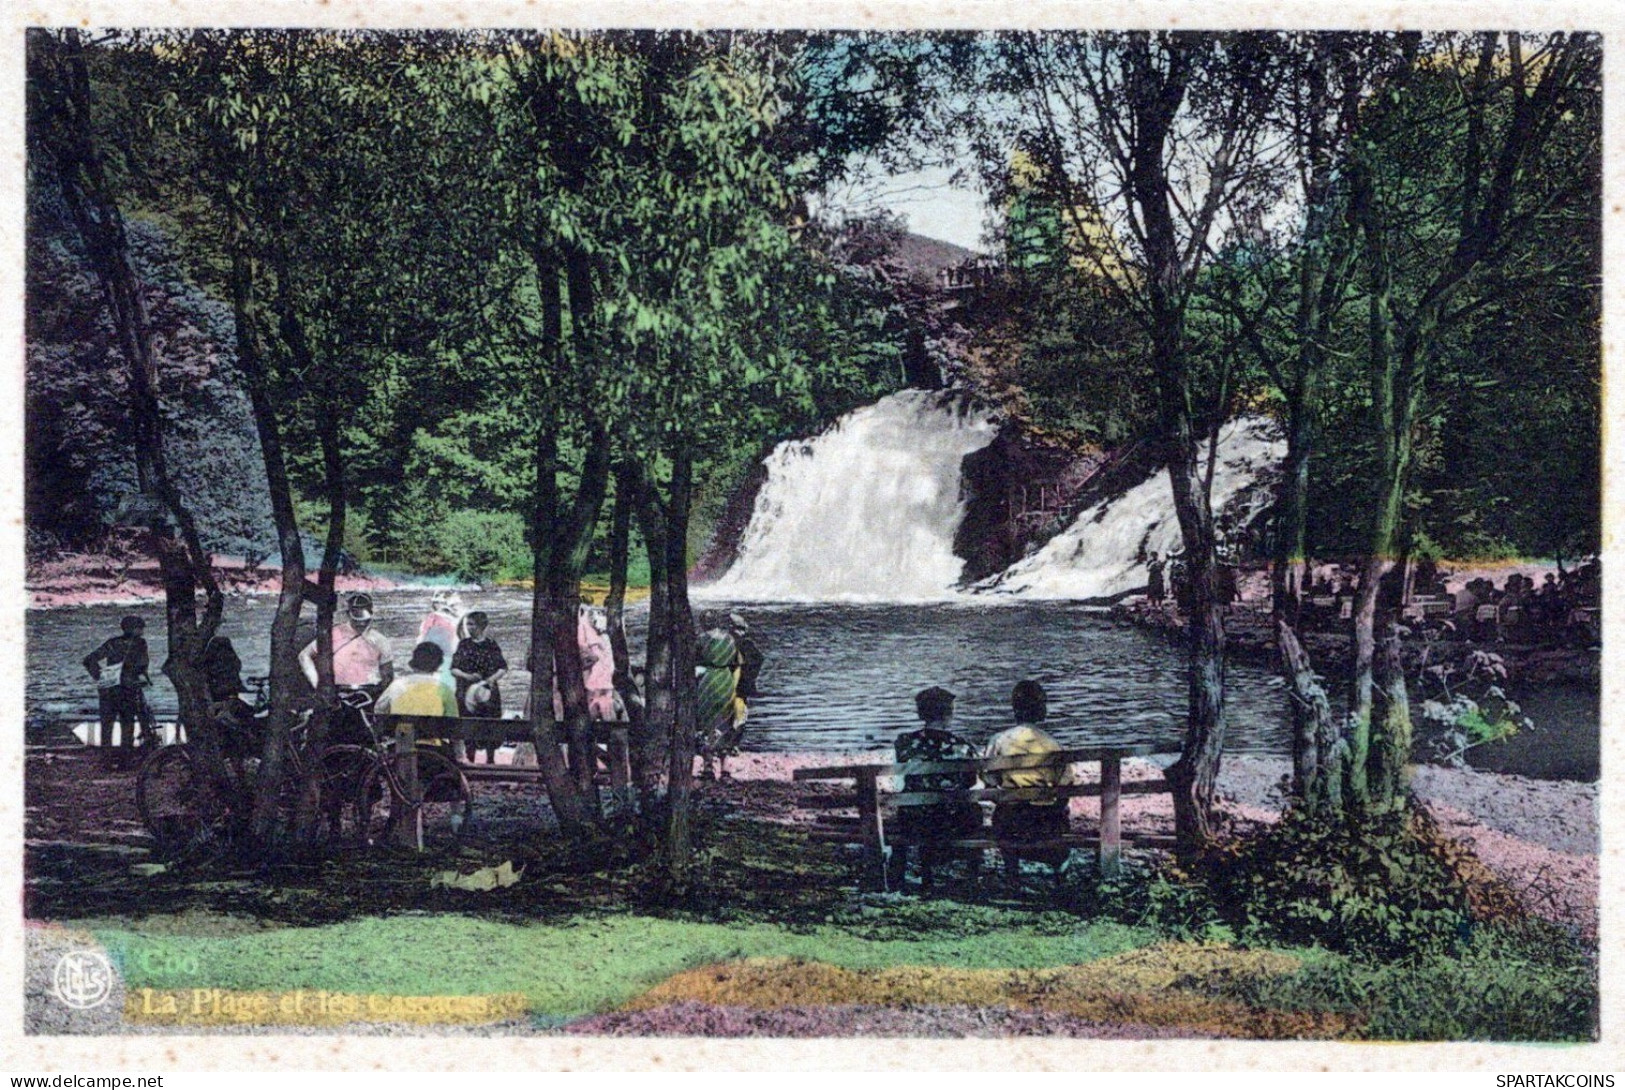 BELGIUM COO WATERFALL Province Of Liège Postcard CPA Unposted #PAD026.A - Stavelot